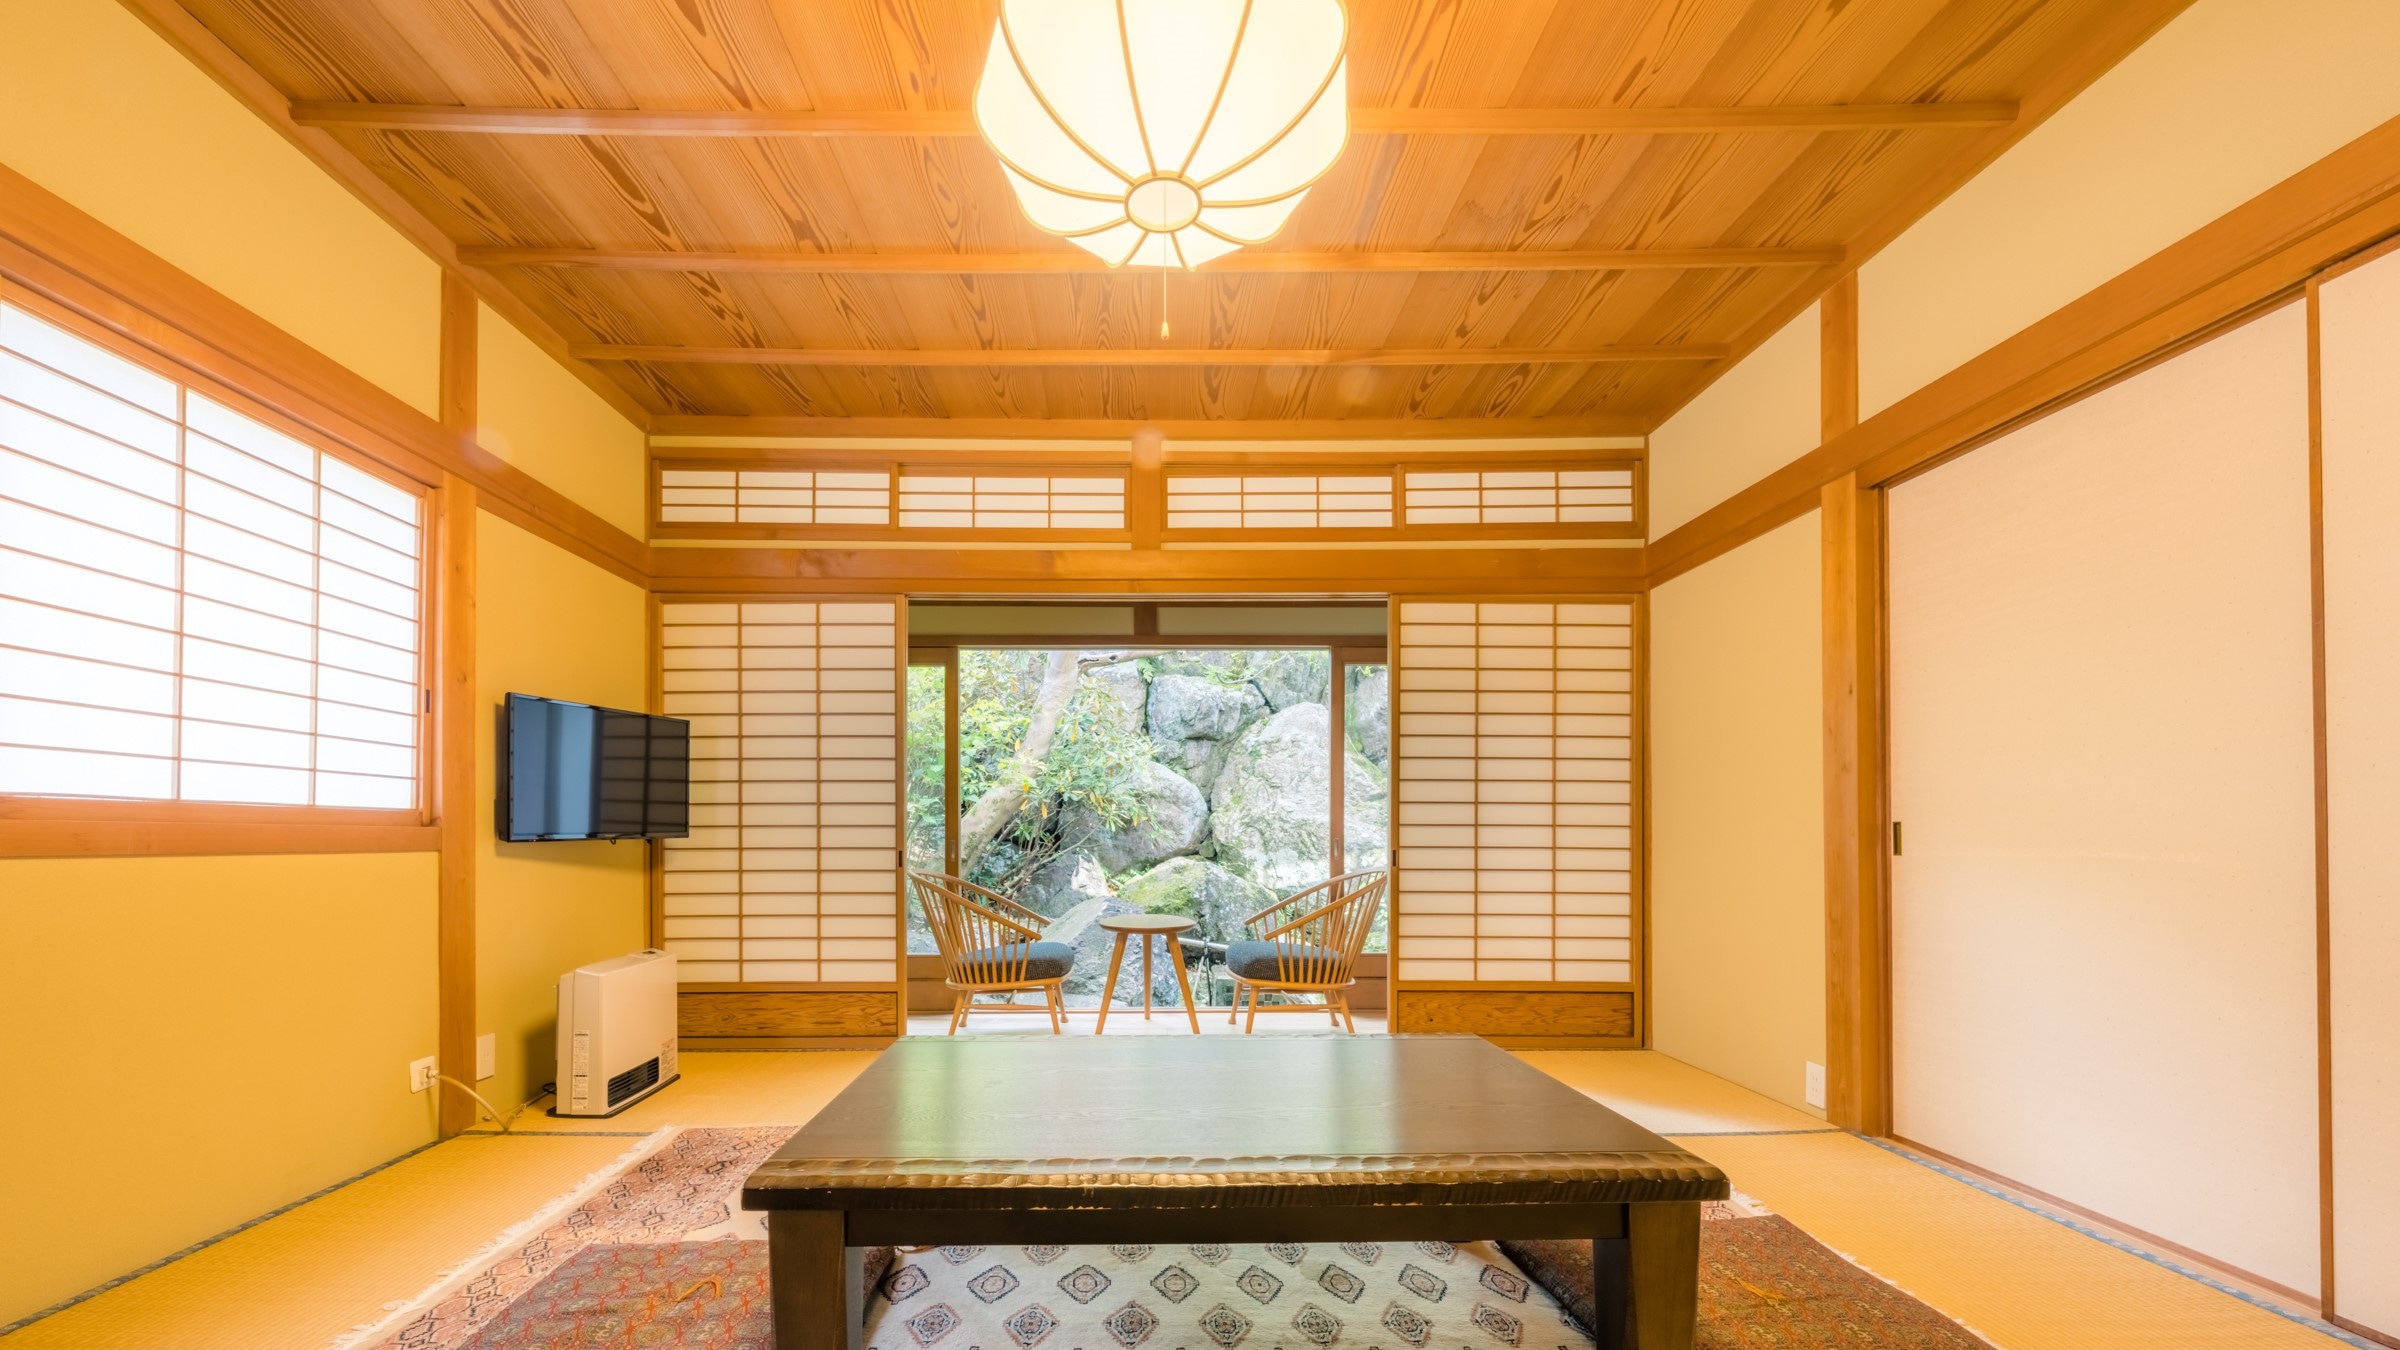 An example of a special Japanese-Western style room turning axis (Japanese-style room part)